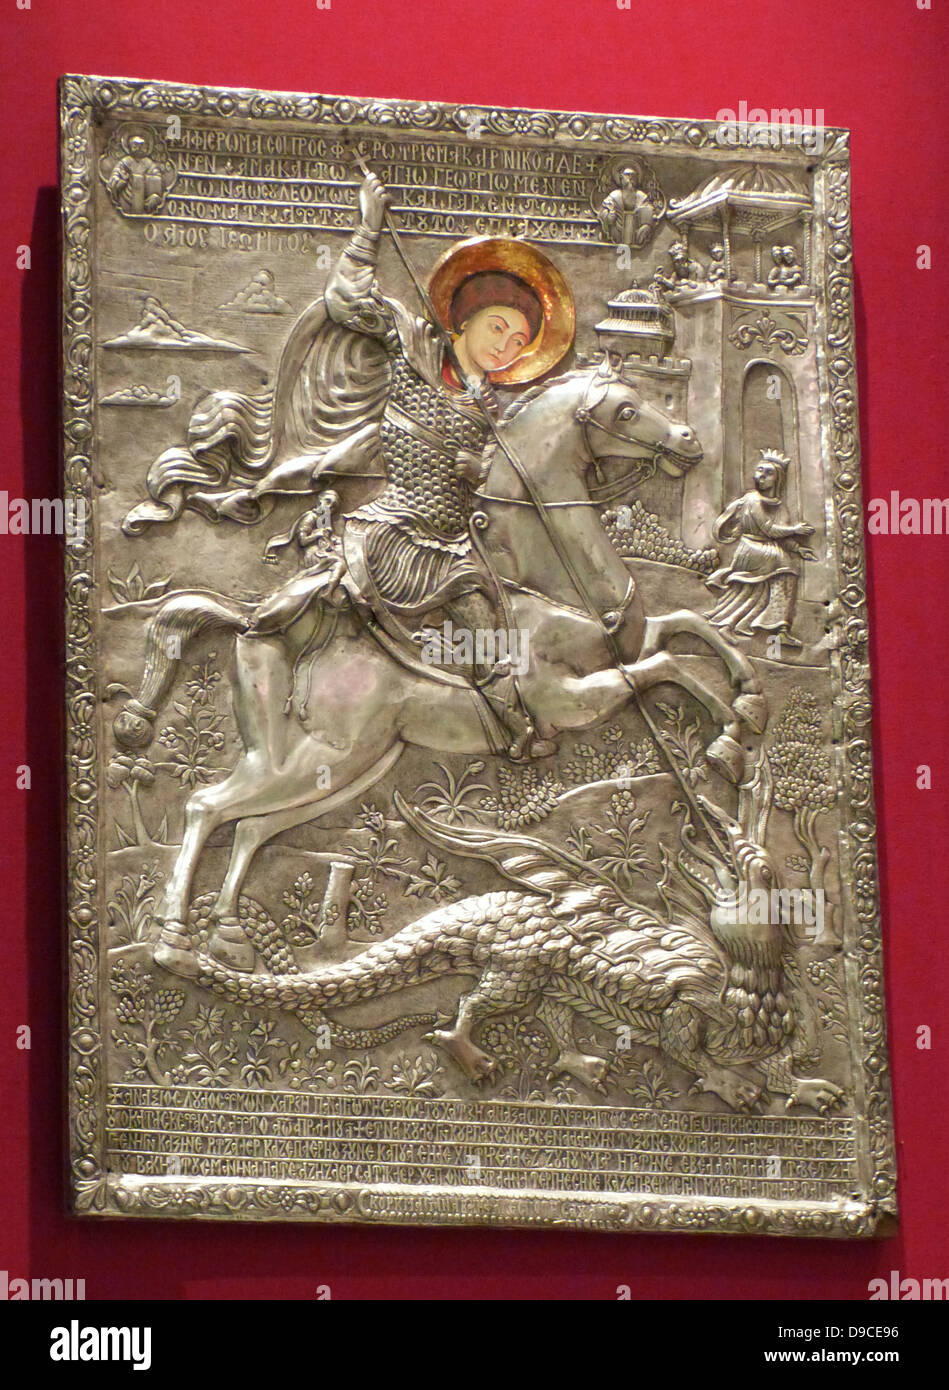 St George, by the goldsmith Georgakis, 1800. According to the Greek and Karamanli inscription, the silver icon was dedicated to the church of St Nicolas in Caesarea. Stock Photo